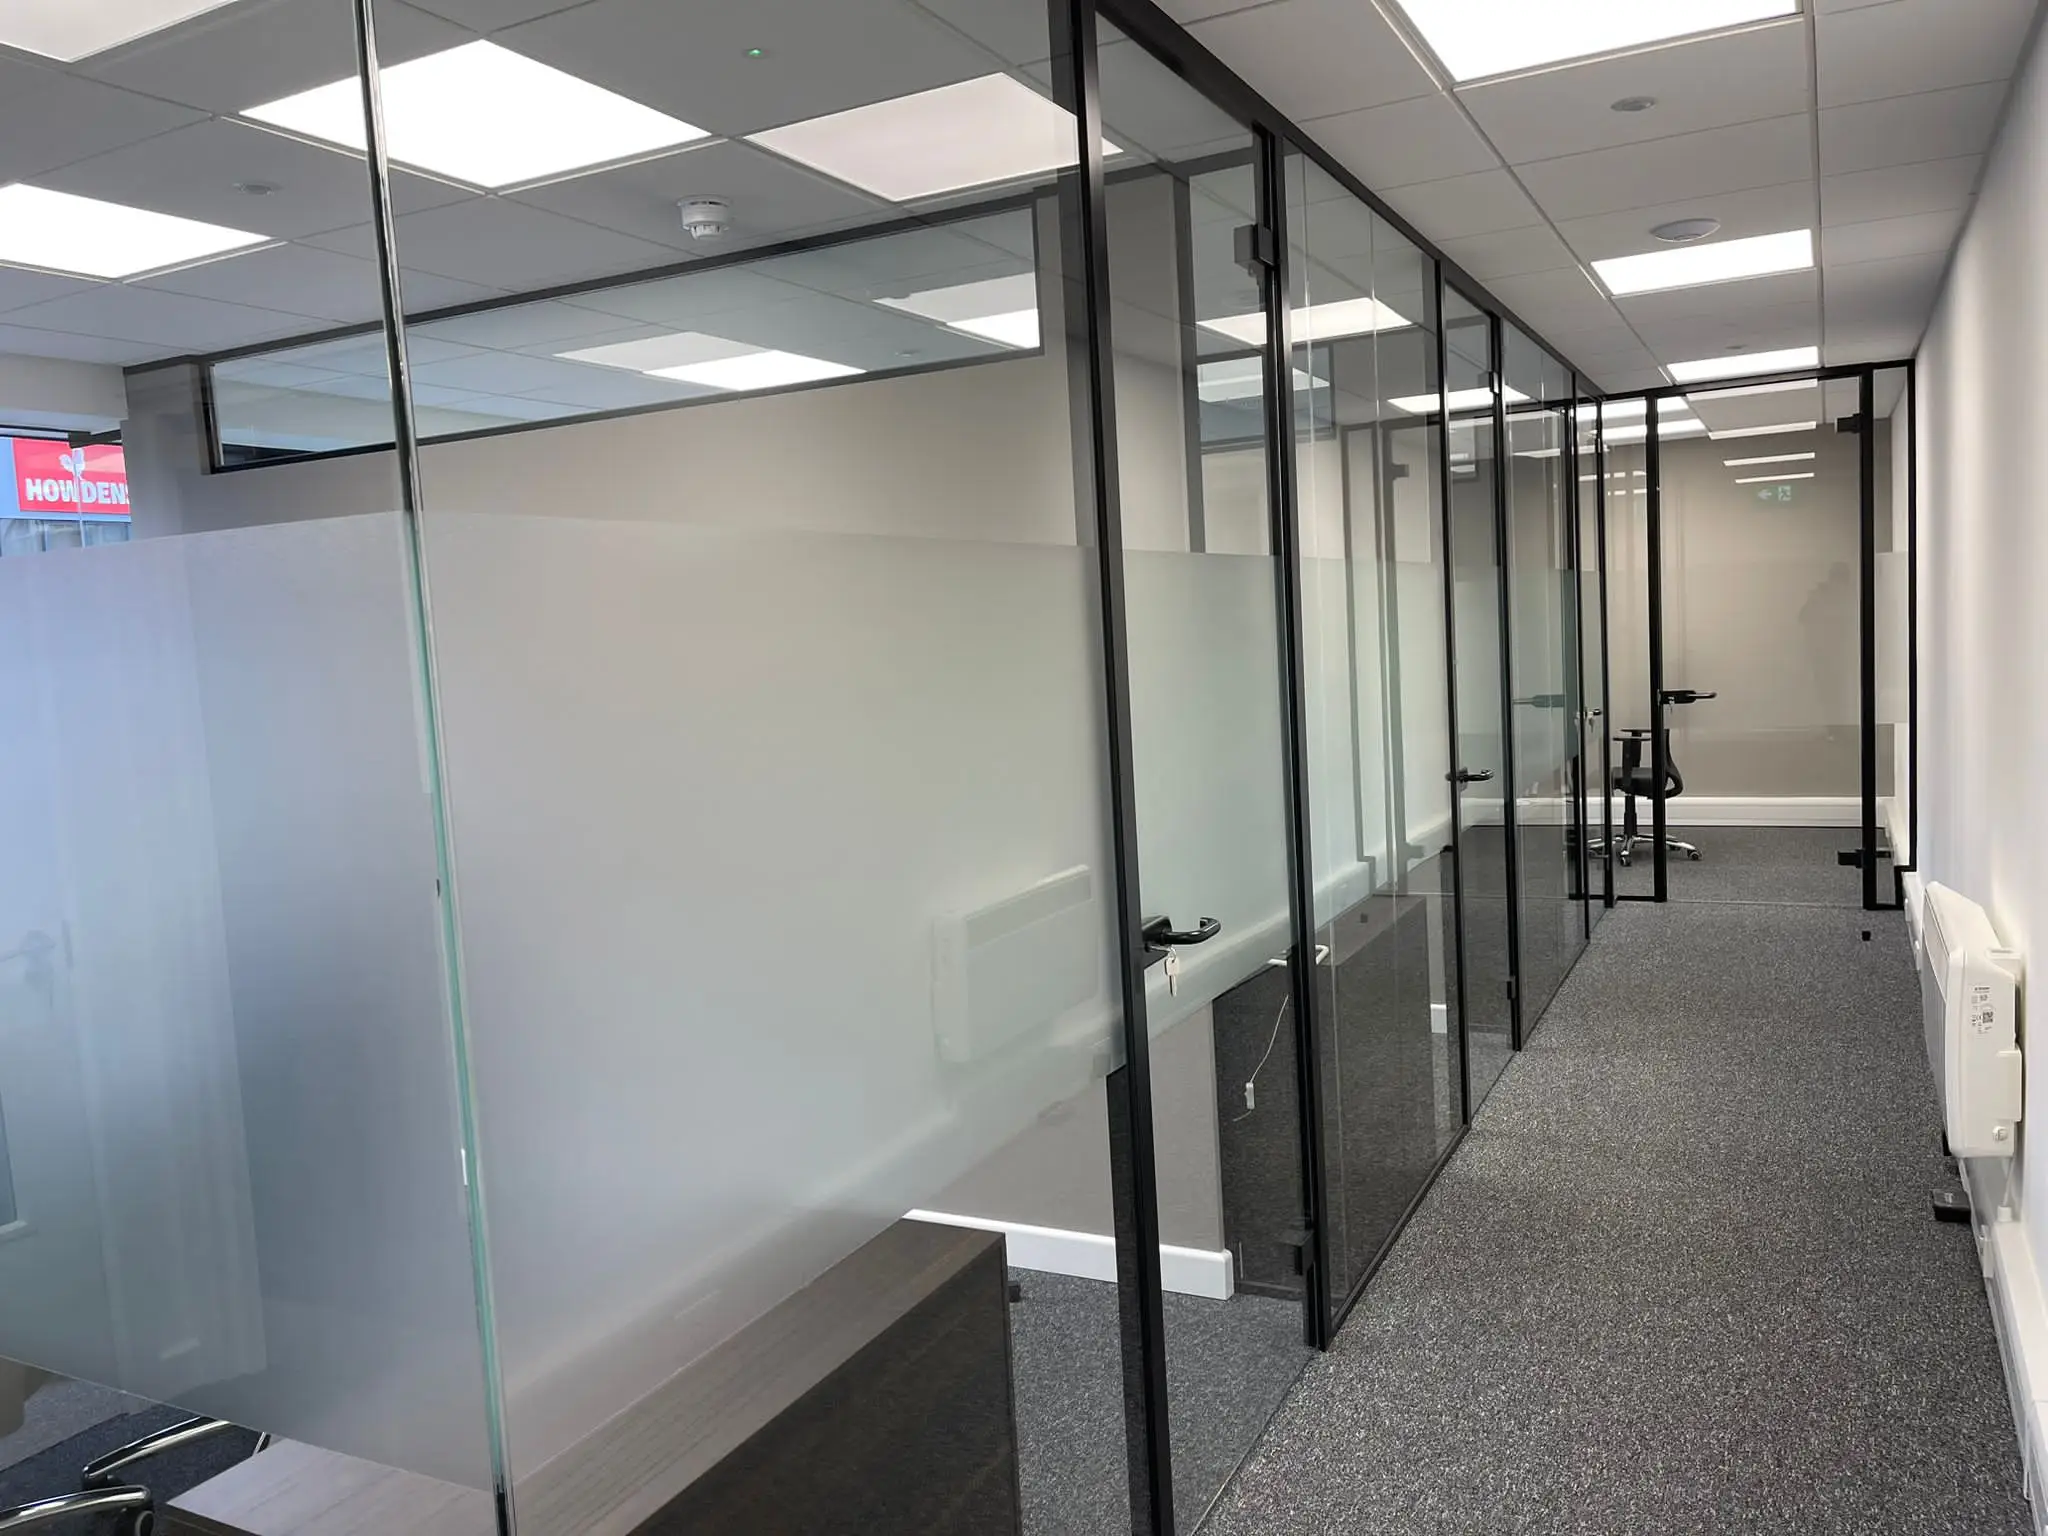 Office with designer floor and single glazed partiton with framed doors